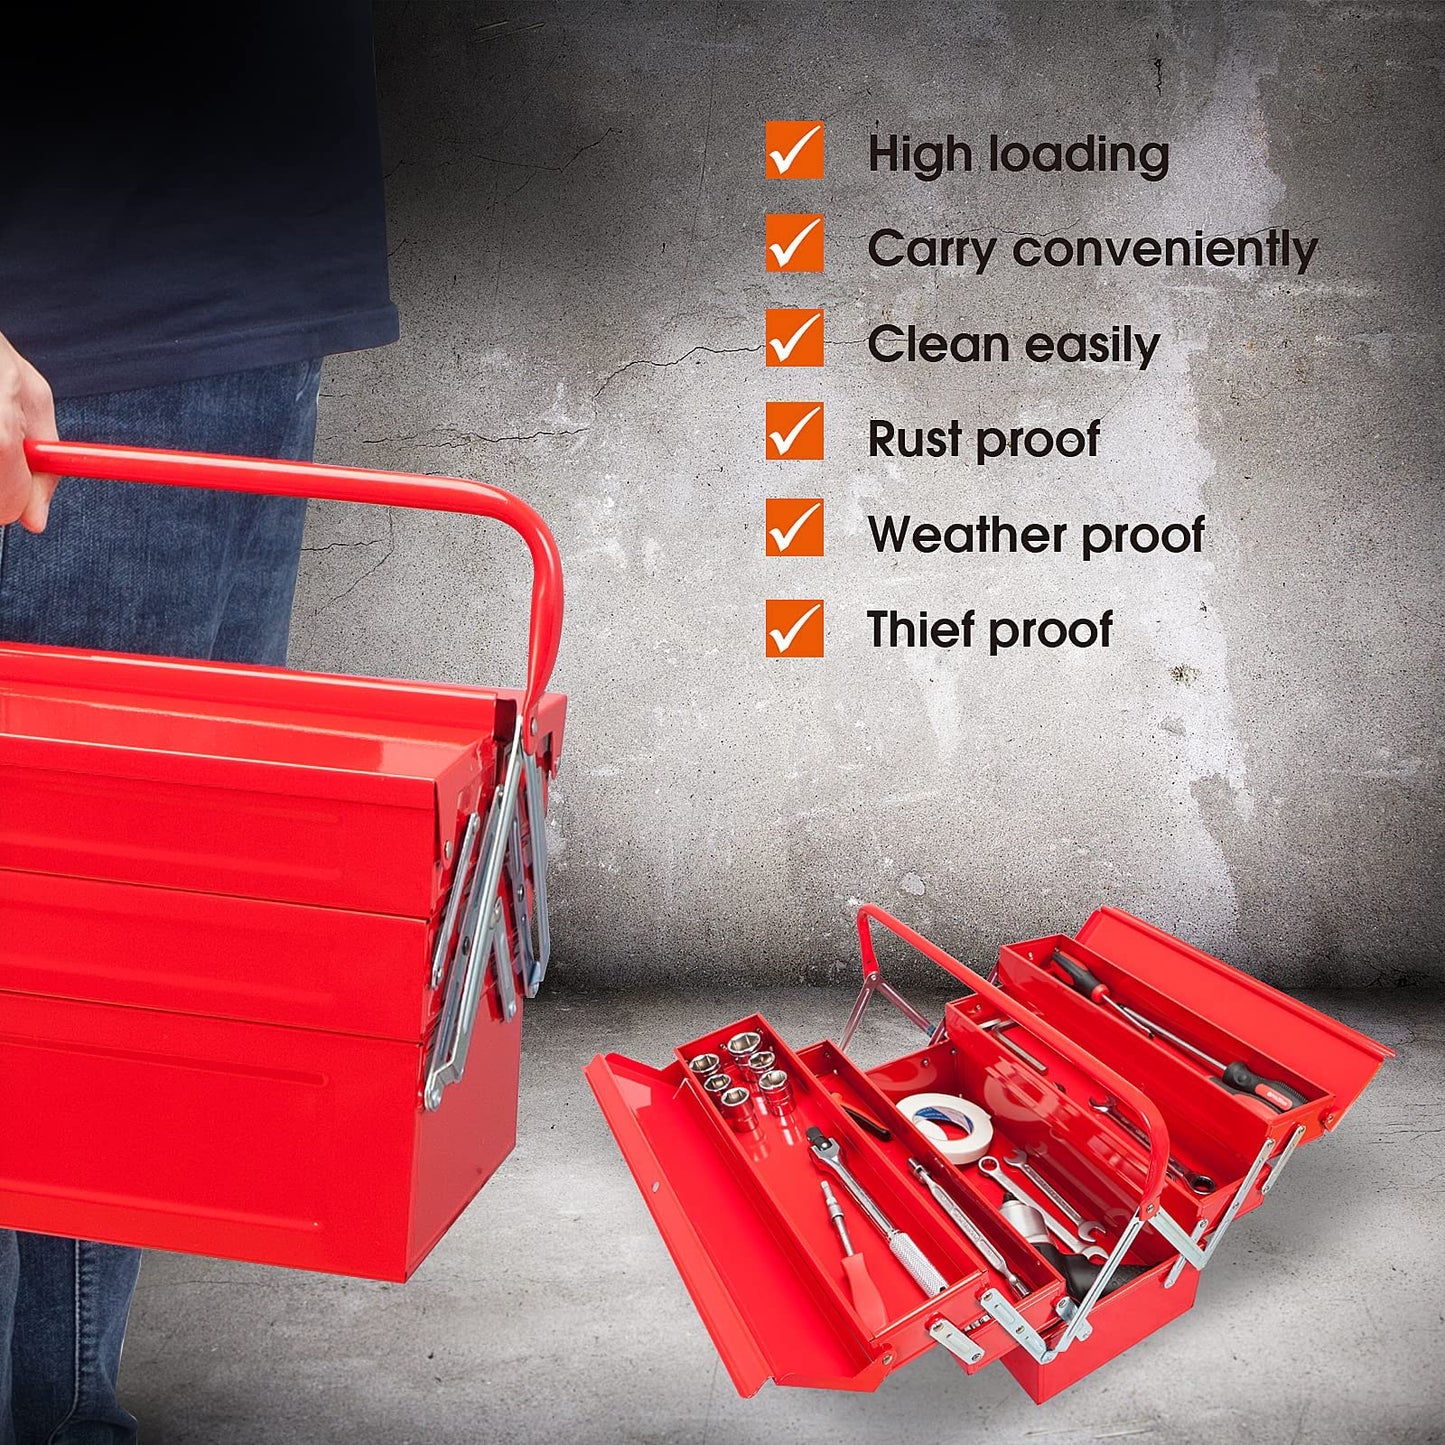 TCE 18" Metal Tool Box, Portable Steel Tool Cabinet with 5 Cantilever Tool Trays,ANTBC-128U,Red